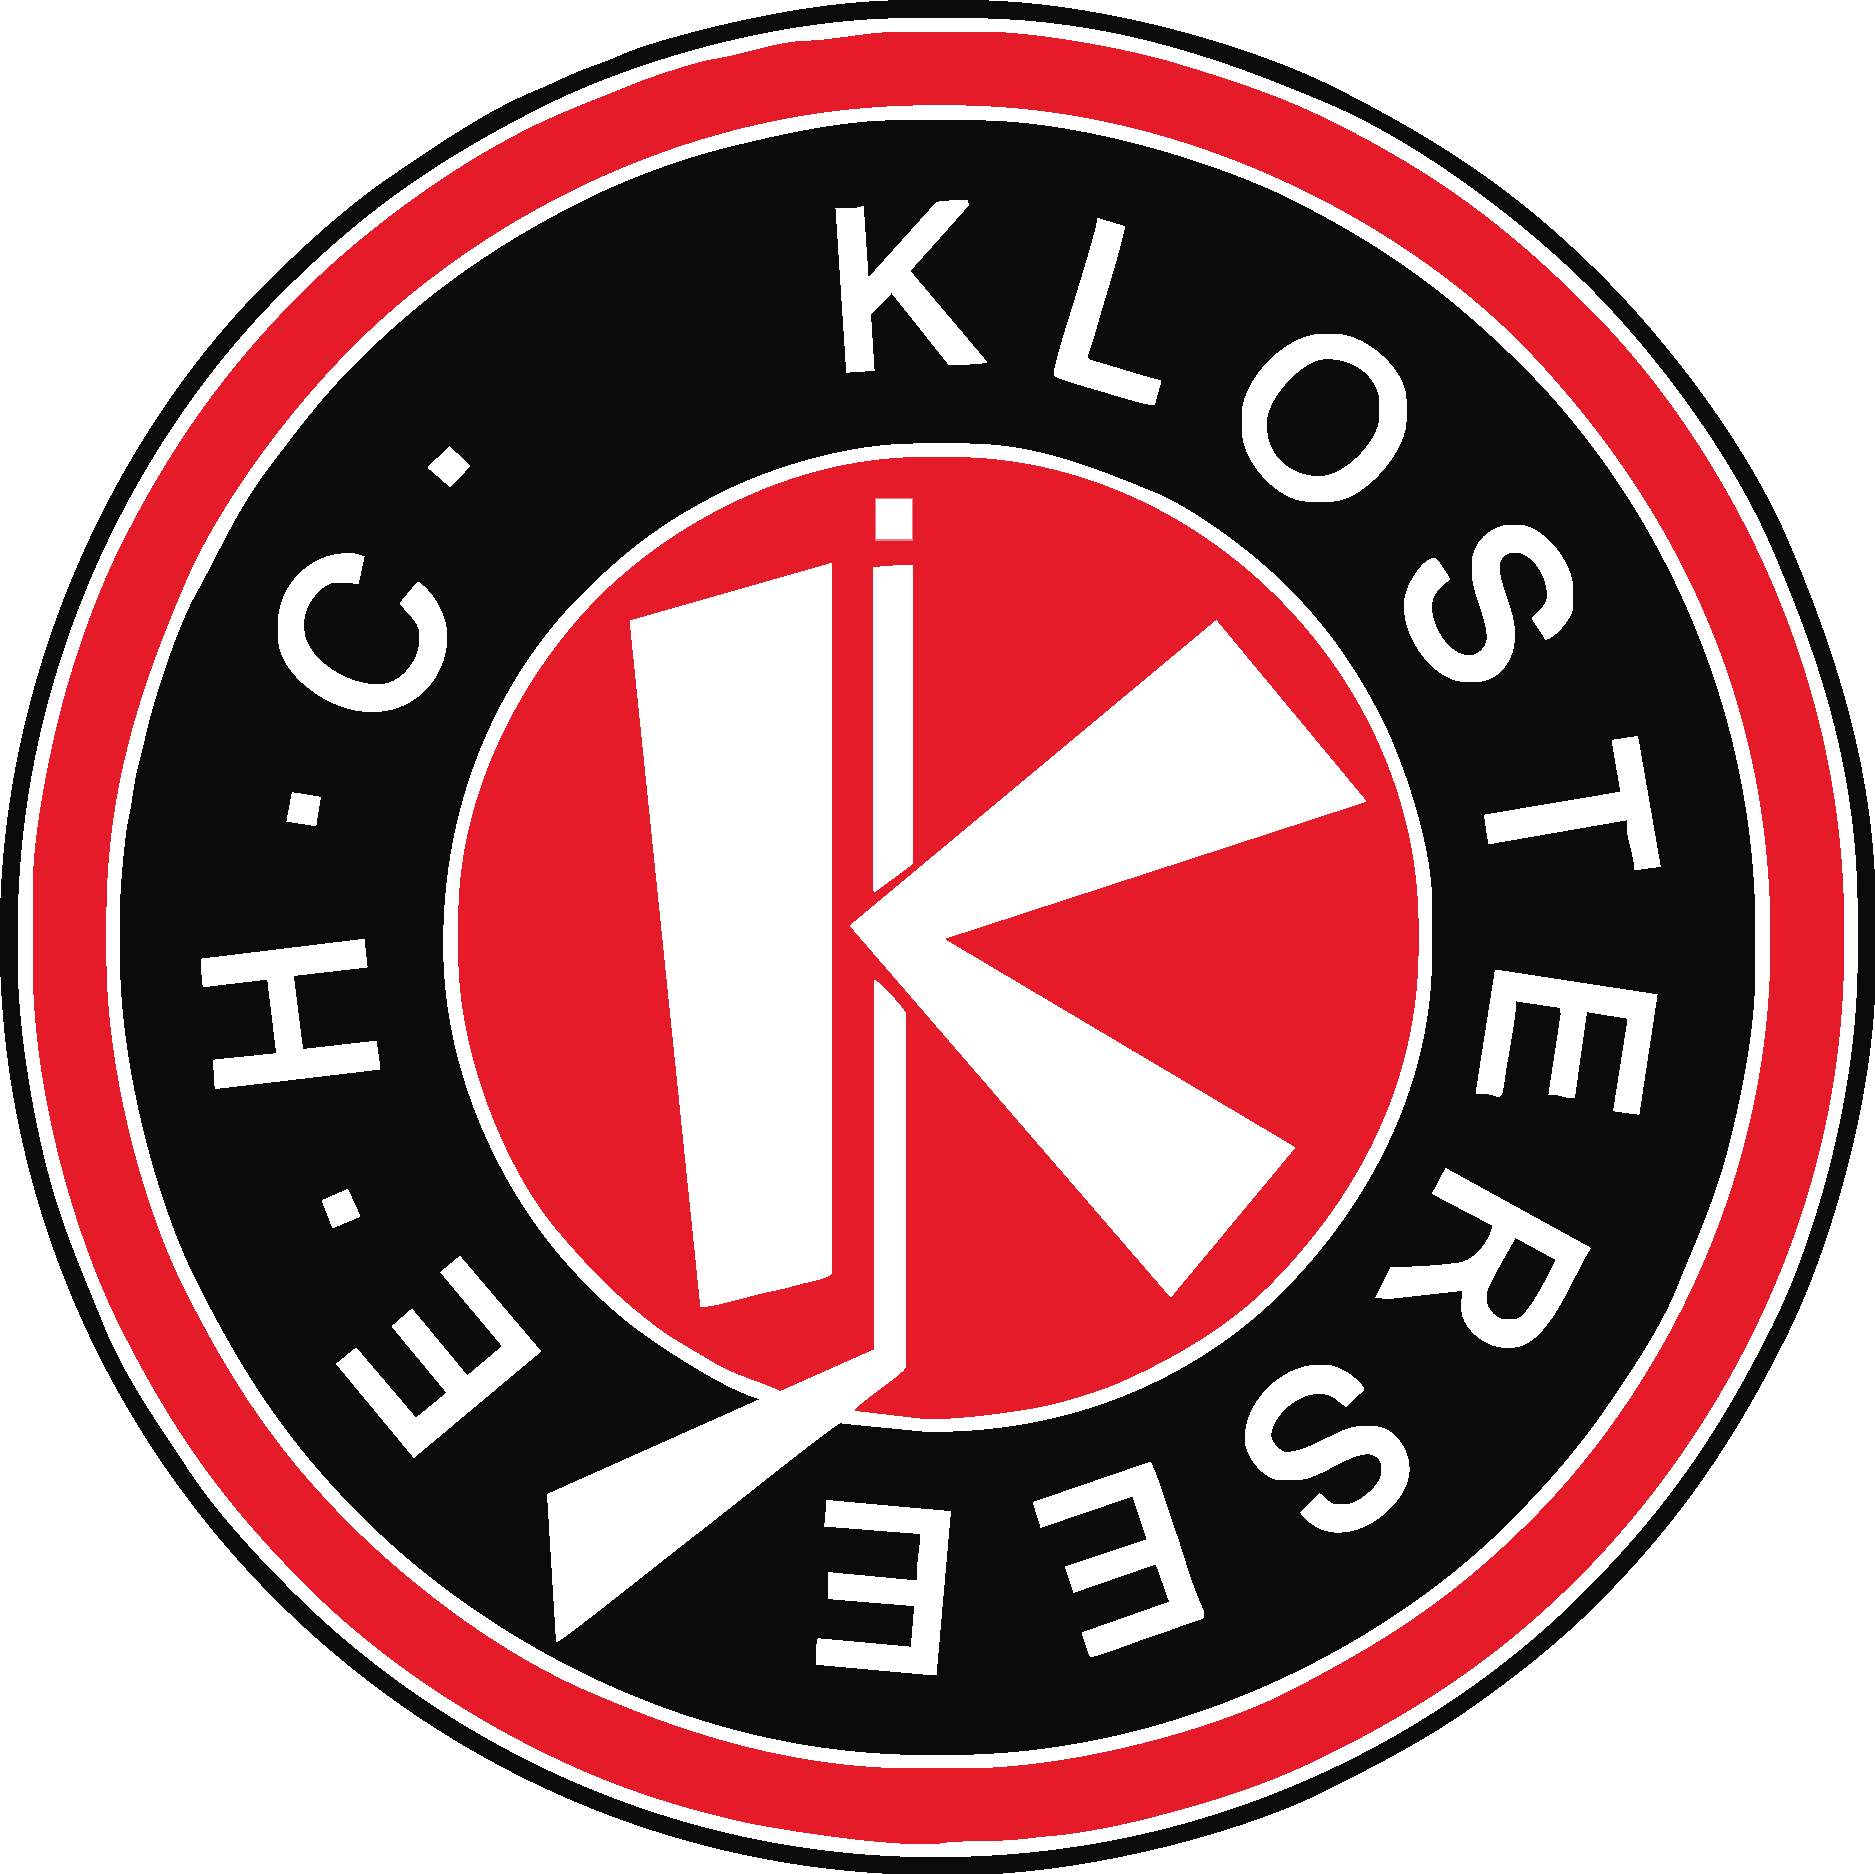 EHC Klostersee Logo Vector